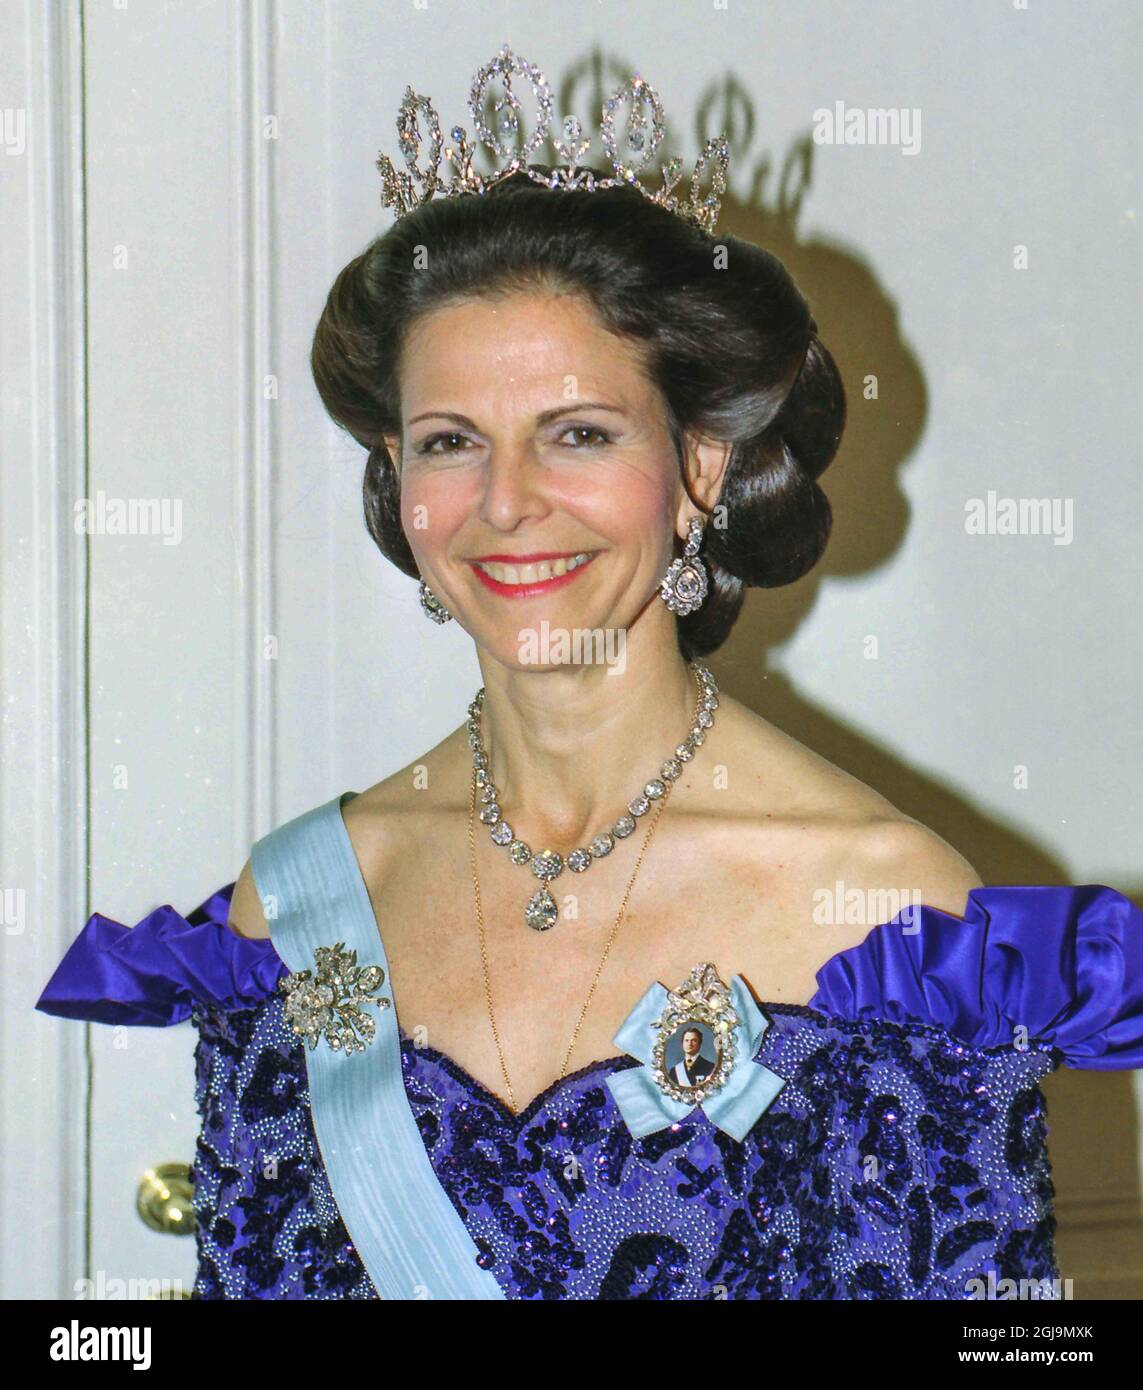 STOCKHOLM 1993-12 * For Your Files* Queen Silvia of Sweden is seen posing for the camera before a Royal banquet at the Royal Palace in Stockholm, Sweden, December, 1993. Foto Leif Blom / TT-Bild code 50080  Stock Photo